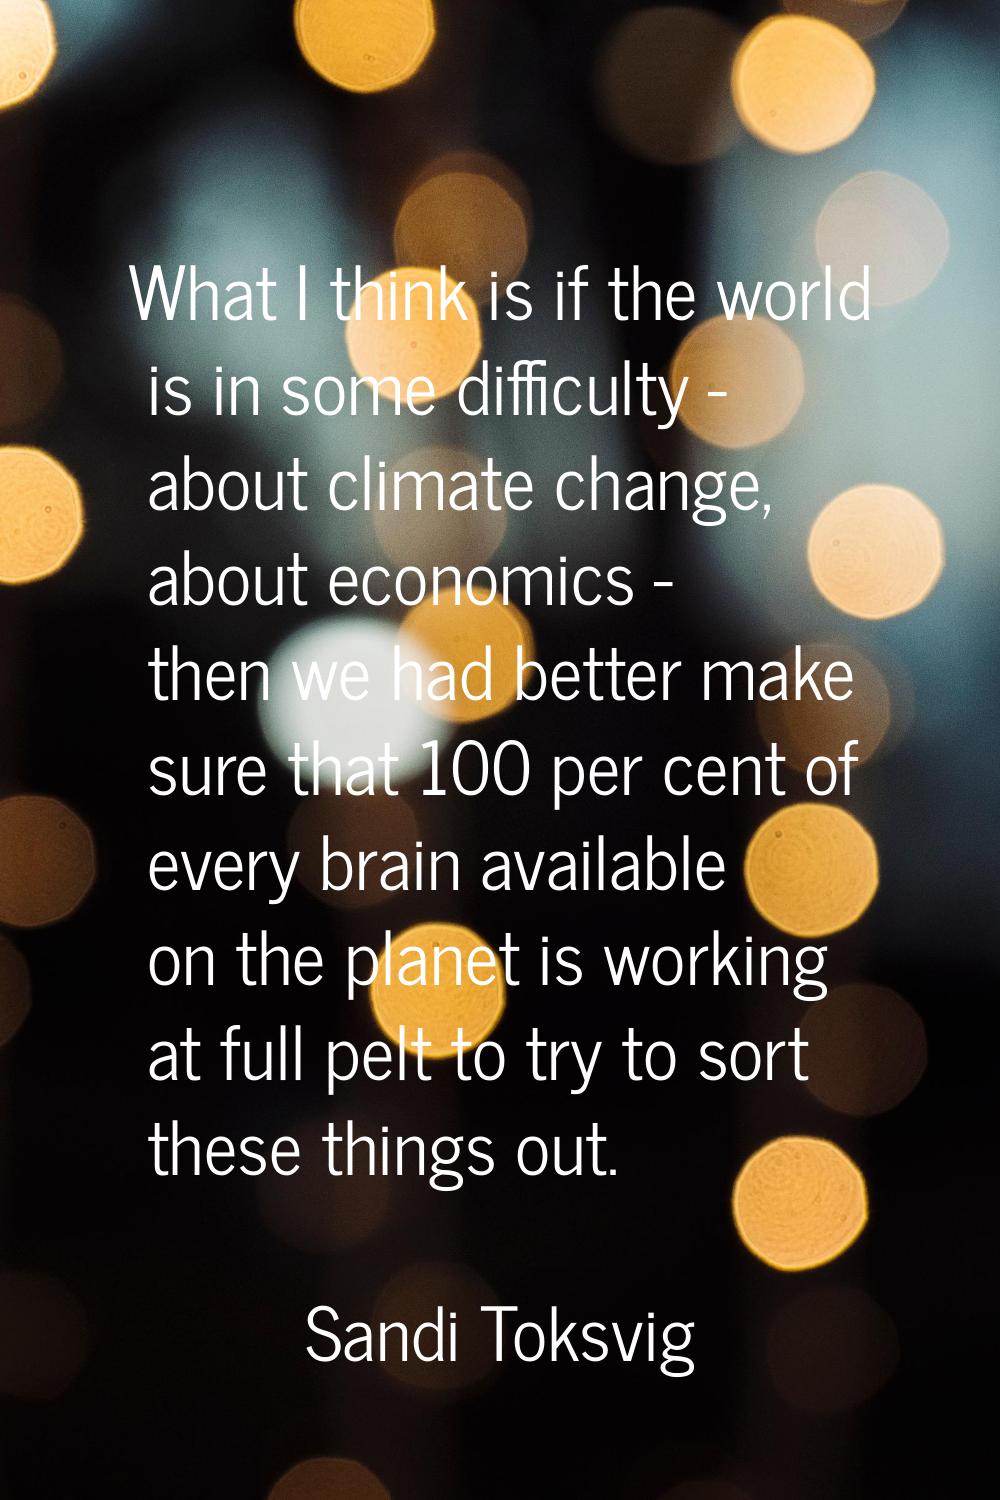 What I think is if the world is in some difficulty - about climate change, about economics - then w